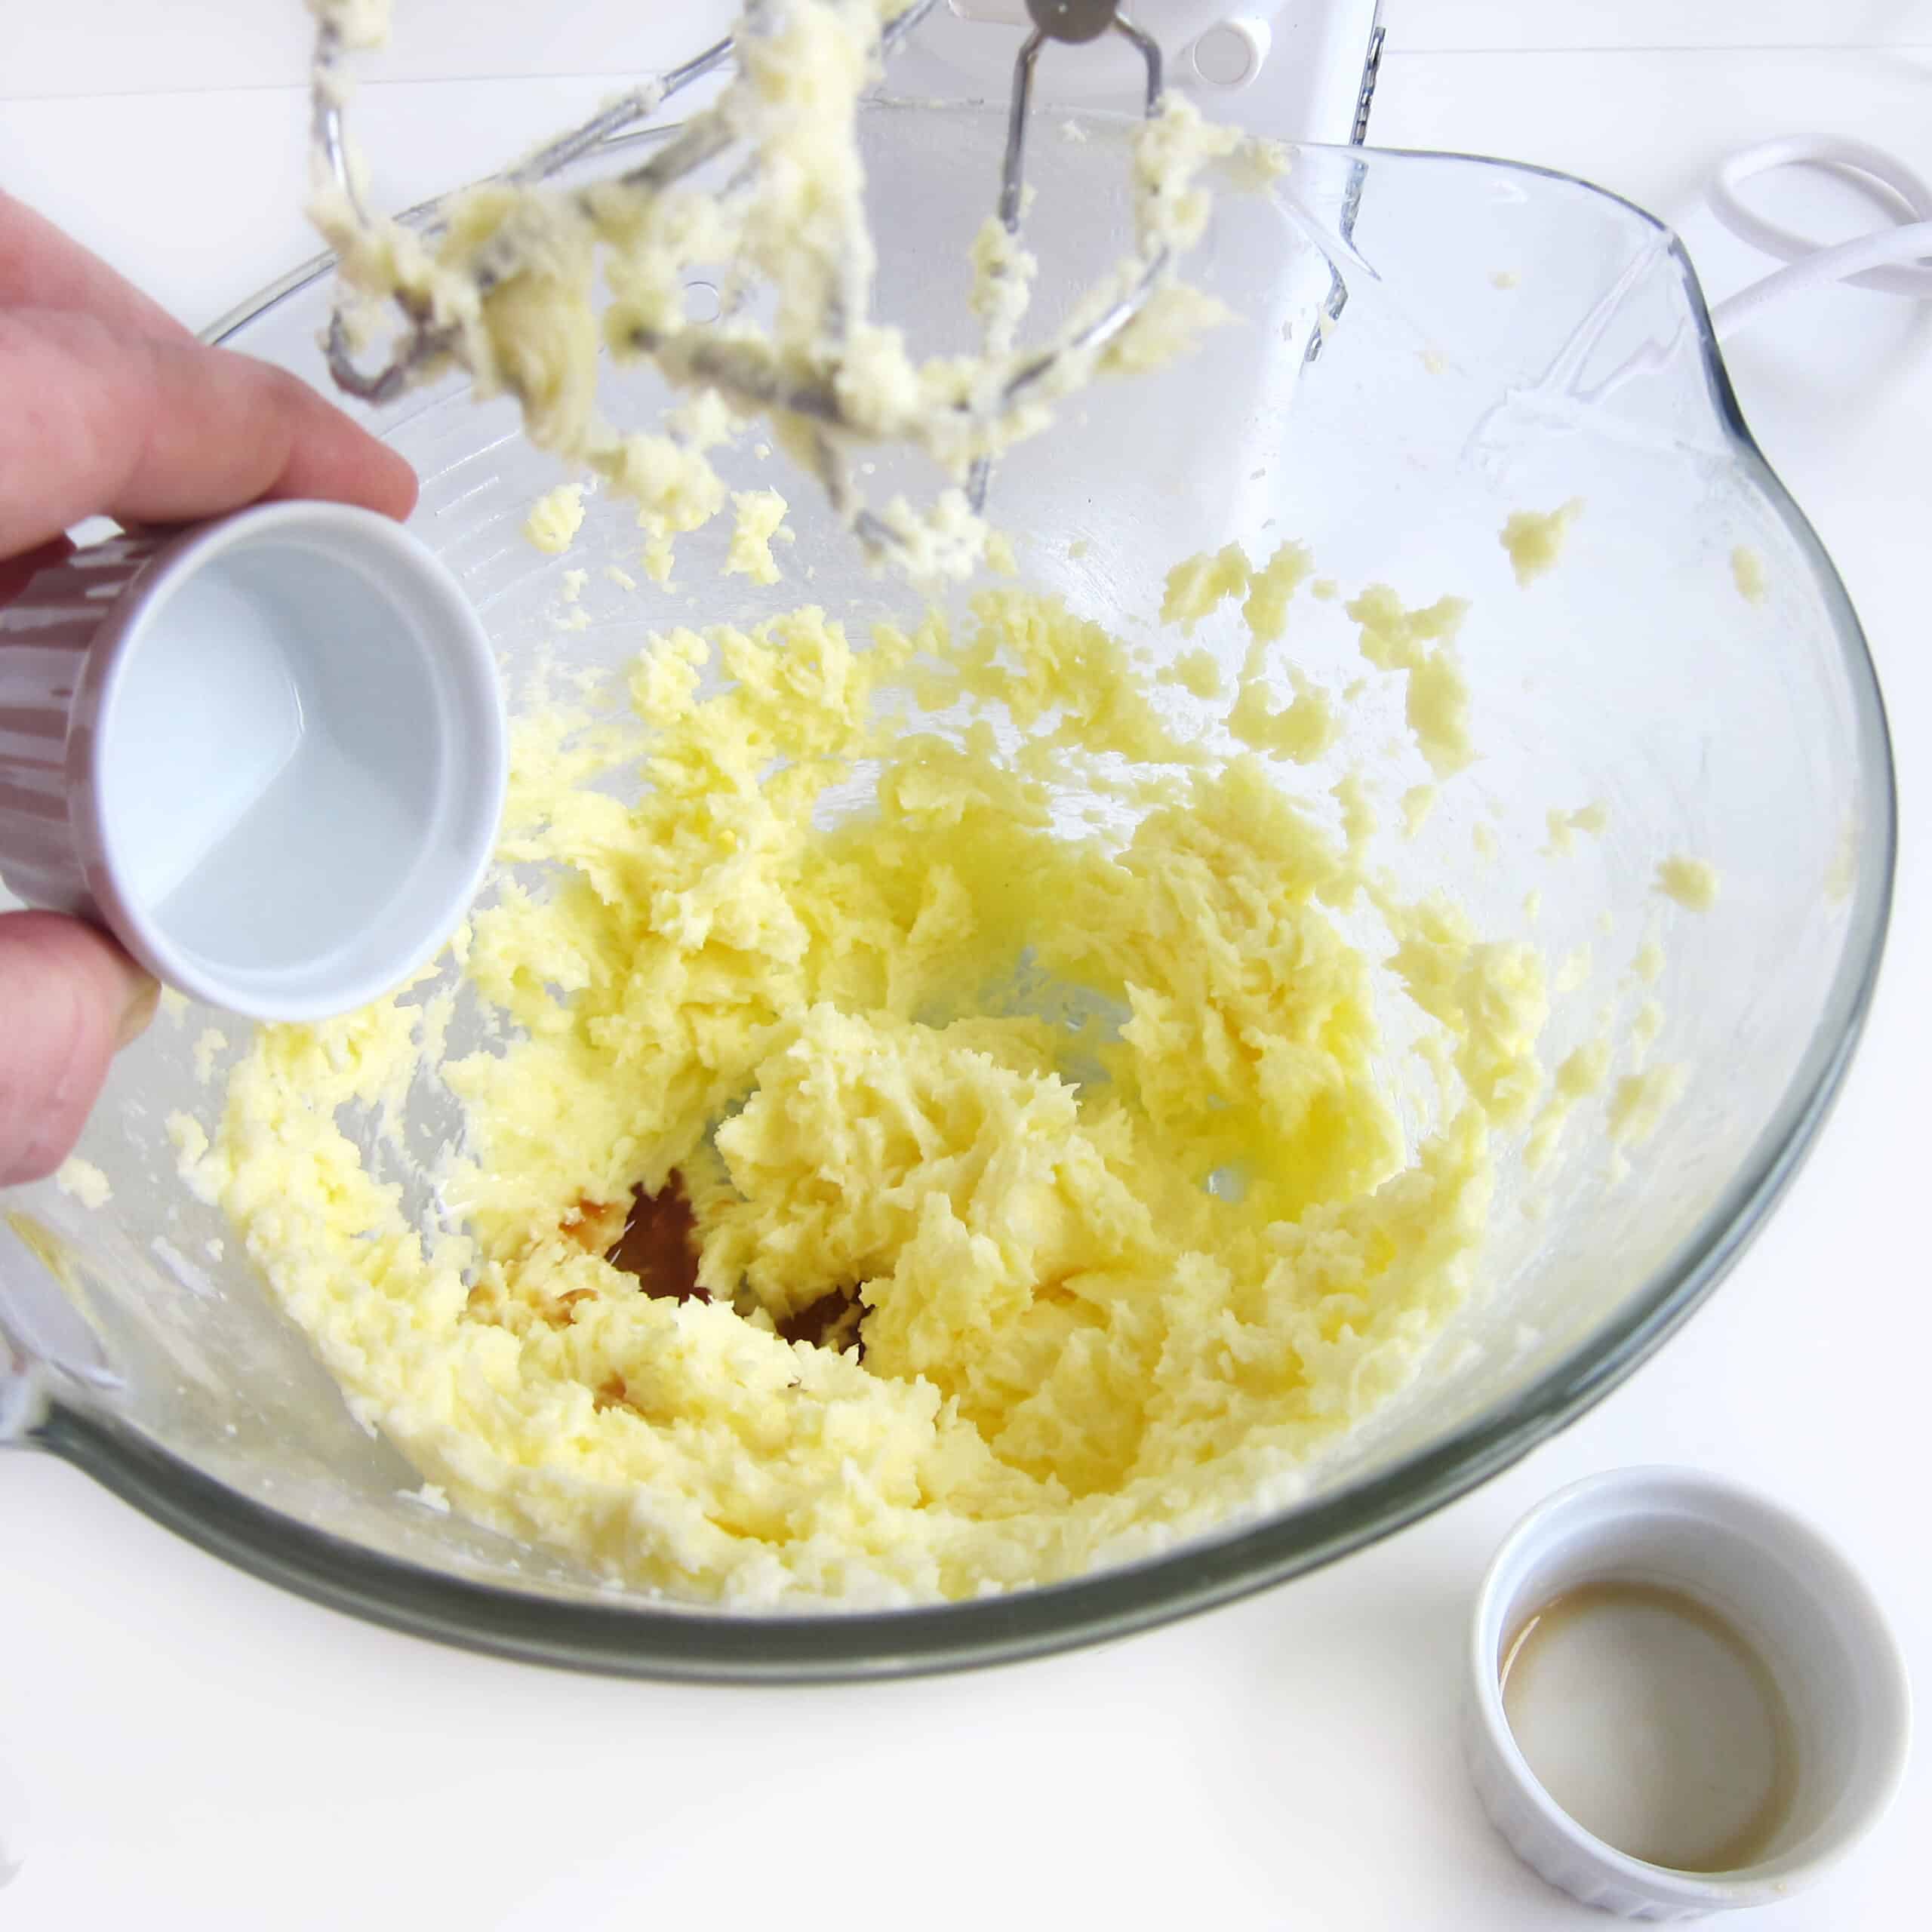 Add vanilla and almond extract to the butter, sugar, and egg mixture.